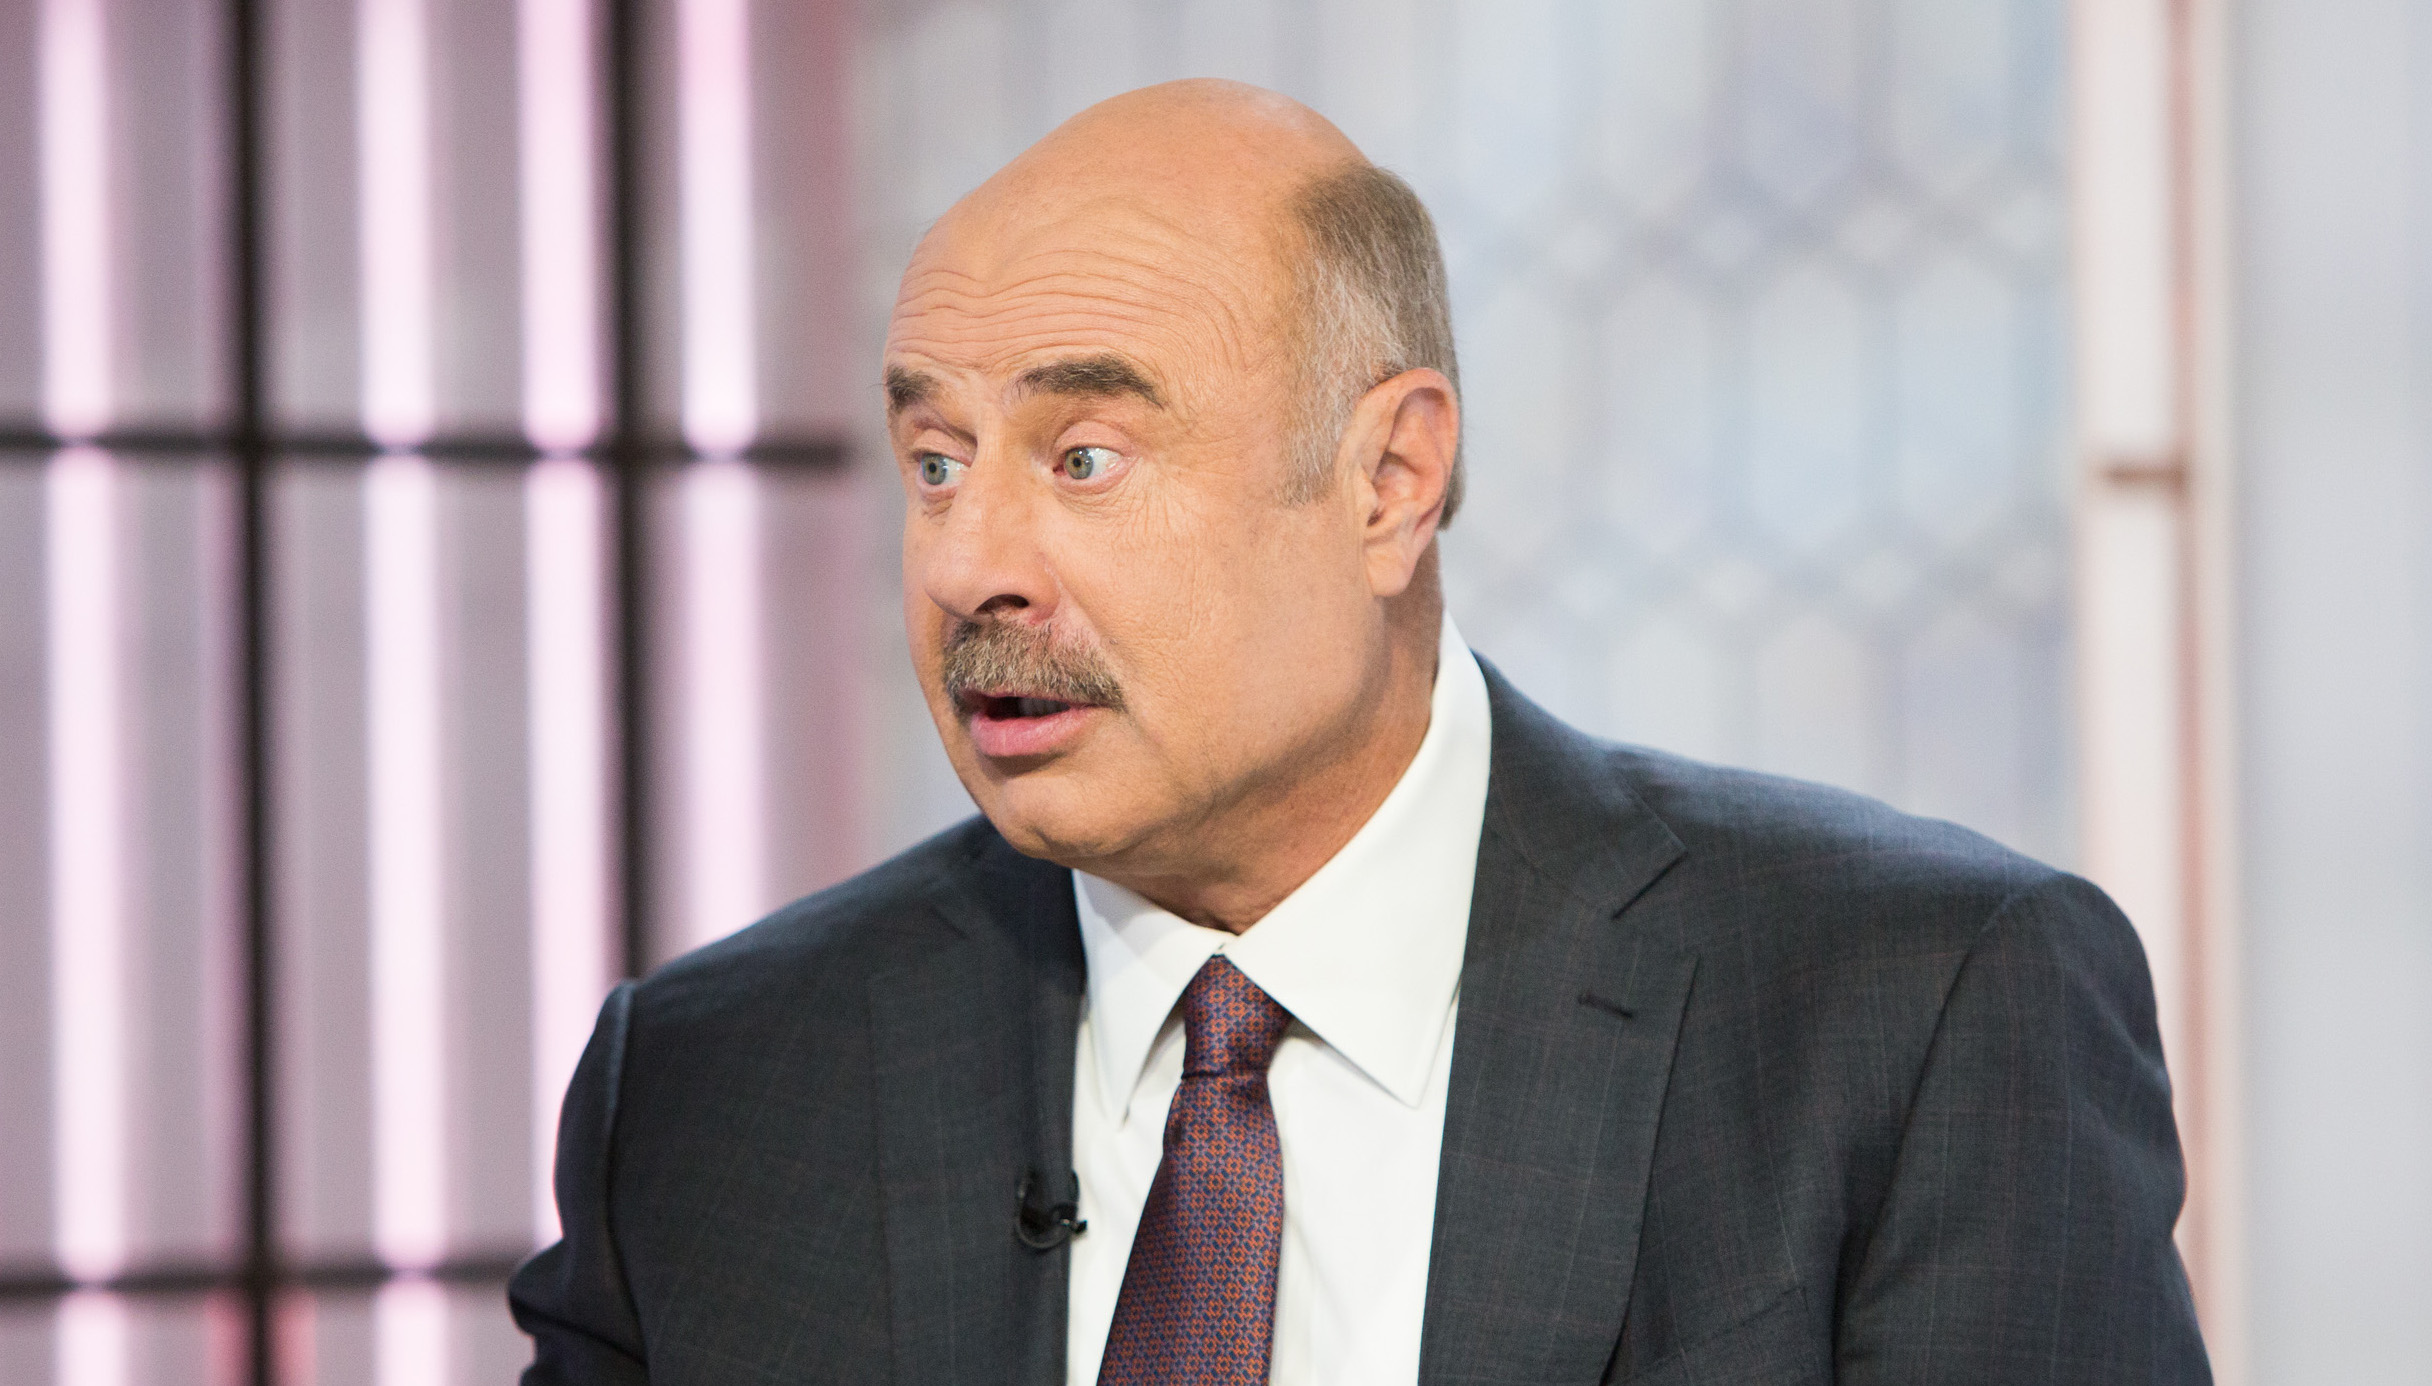 Dr. Phil Torches ‘The View’ Co-Hosts Over Impact Of COVID Lockdowns On Kids: ‘That’s A Fact’